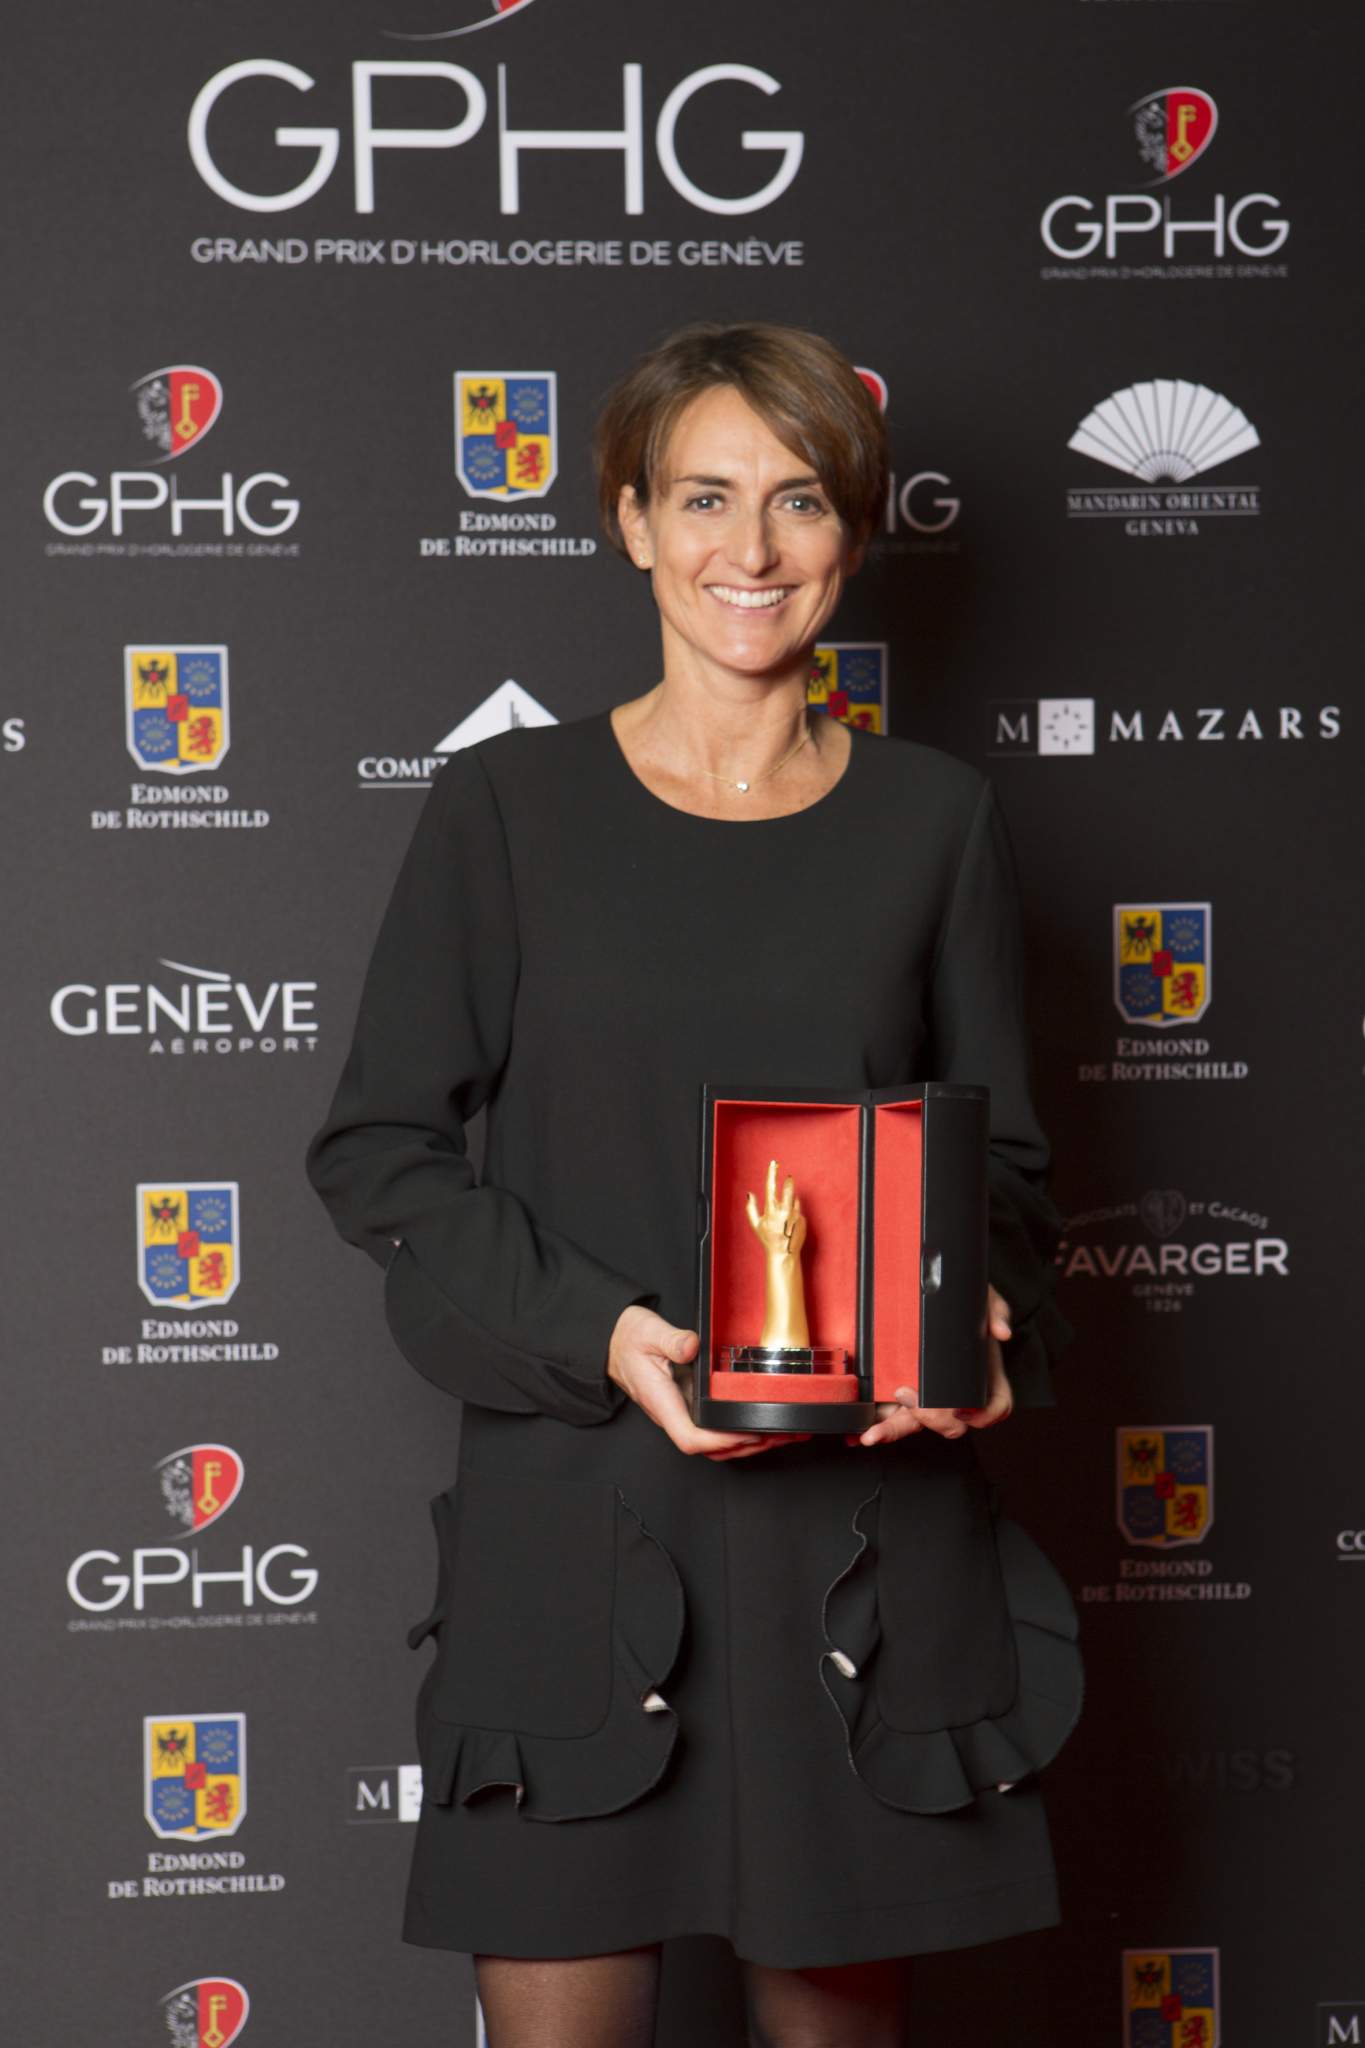 Delphine Favier (Managing Director of Montblanc Suisse, winner of the Chronograph Wazch Prize 2016)